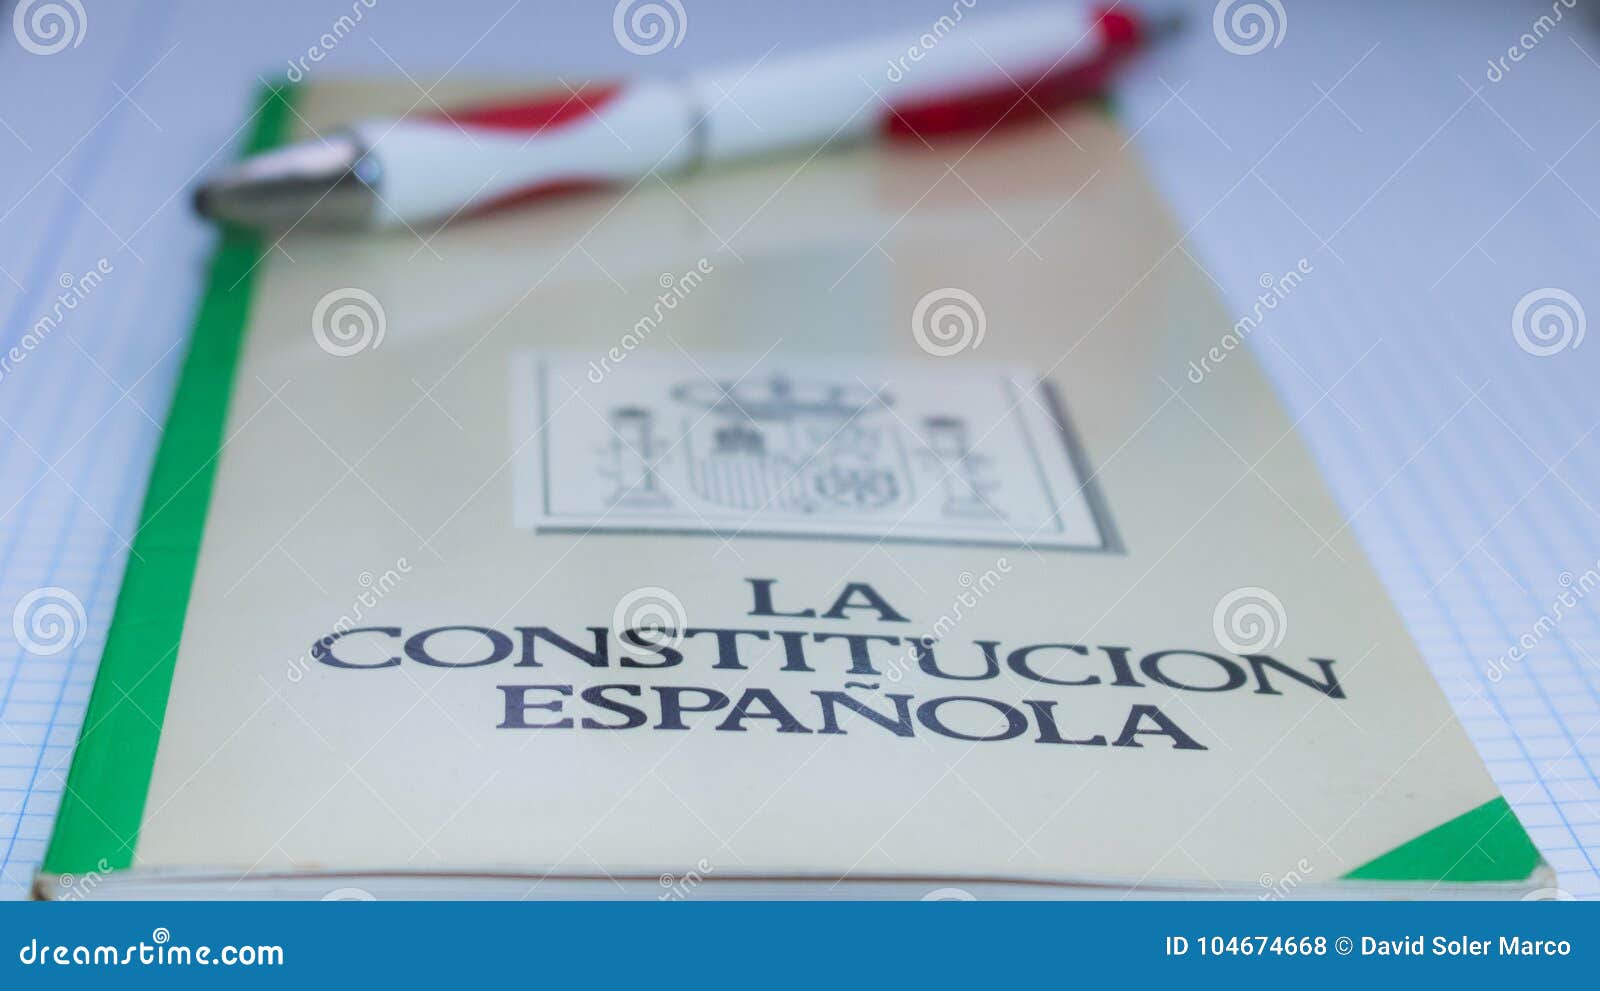 book of the spanish constitution wiht a pen and the graphical white background